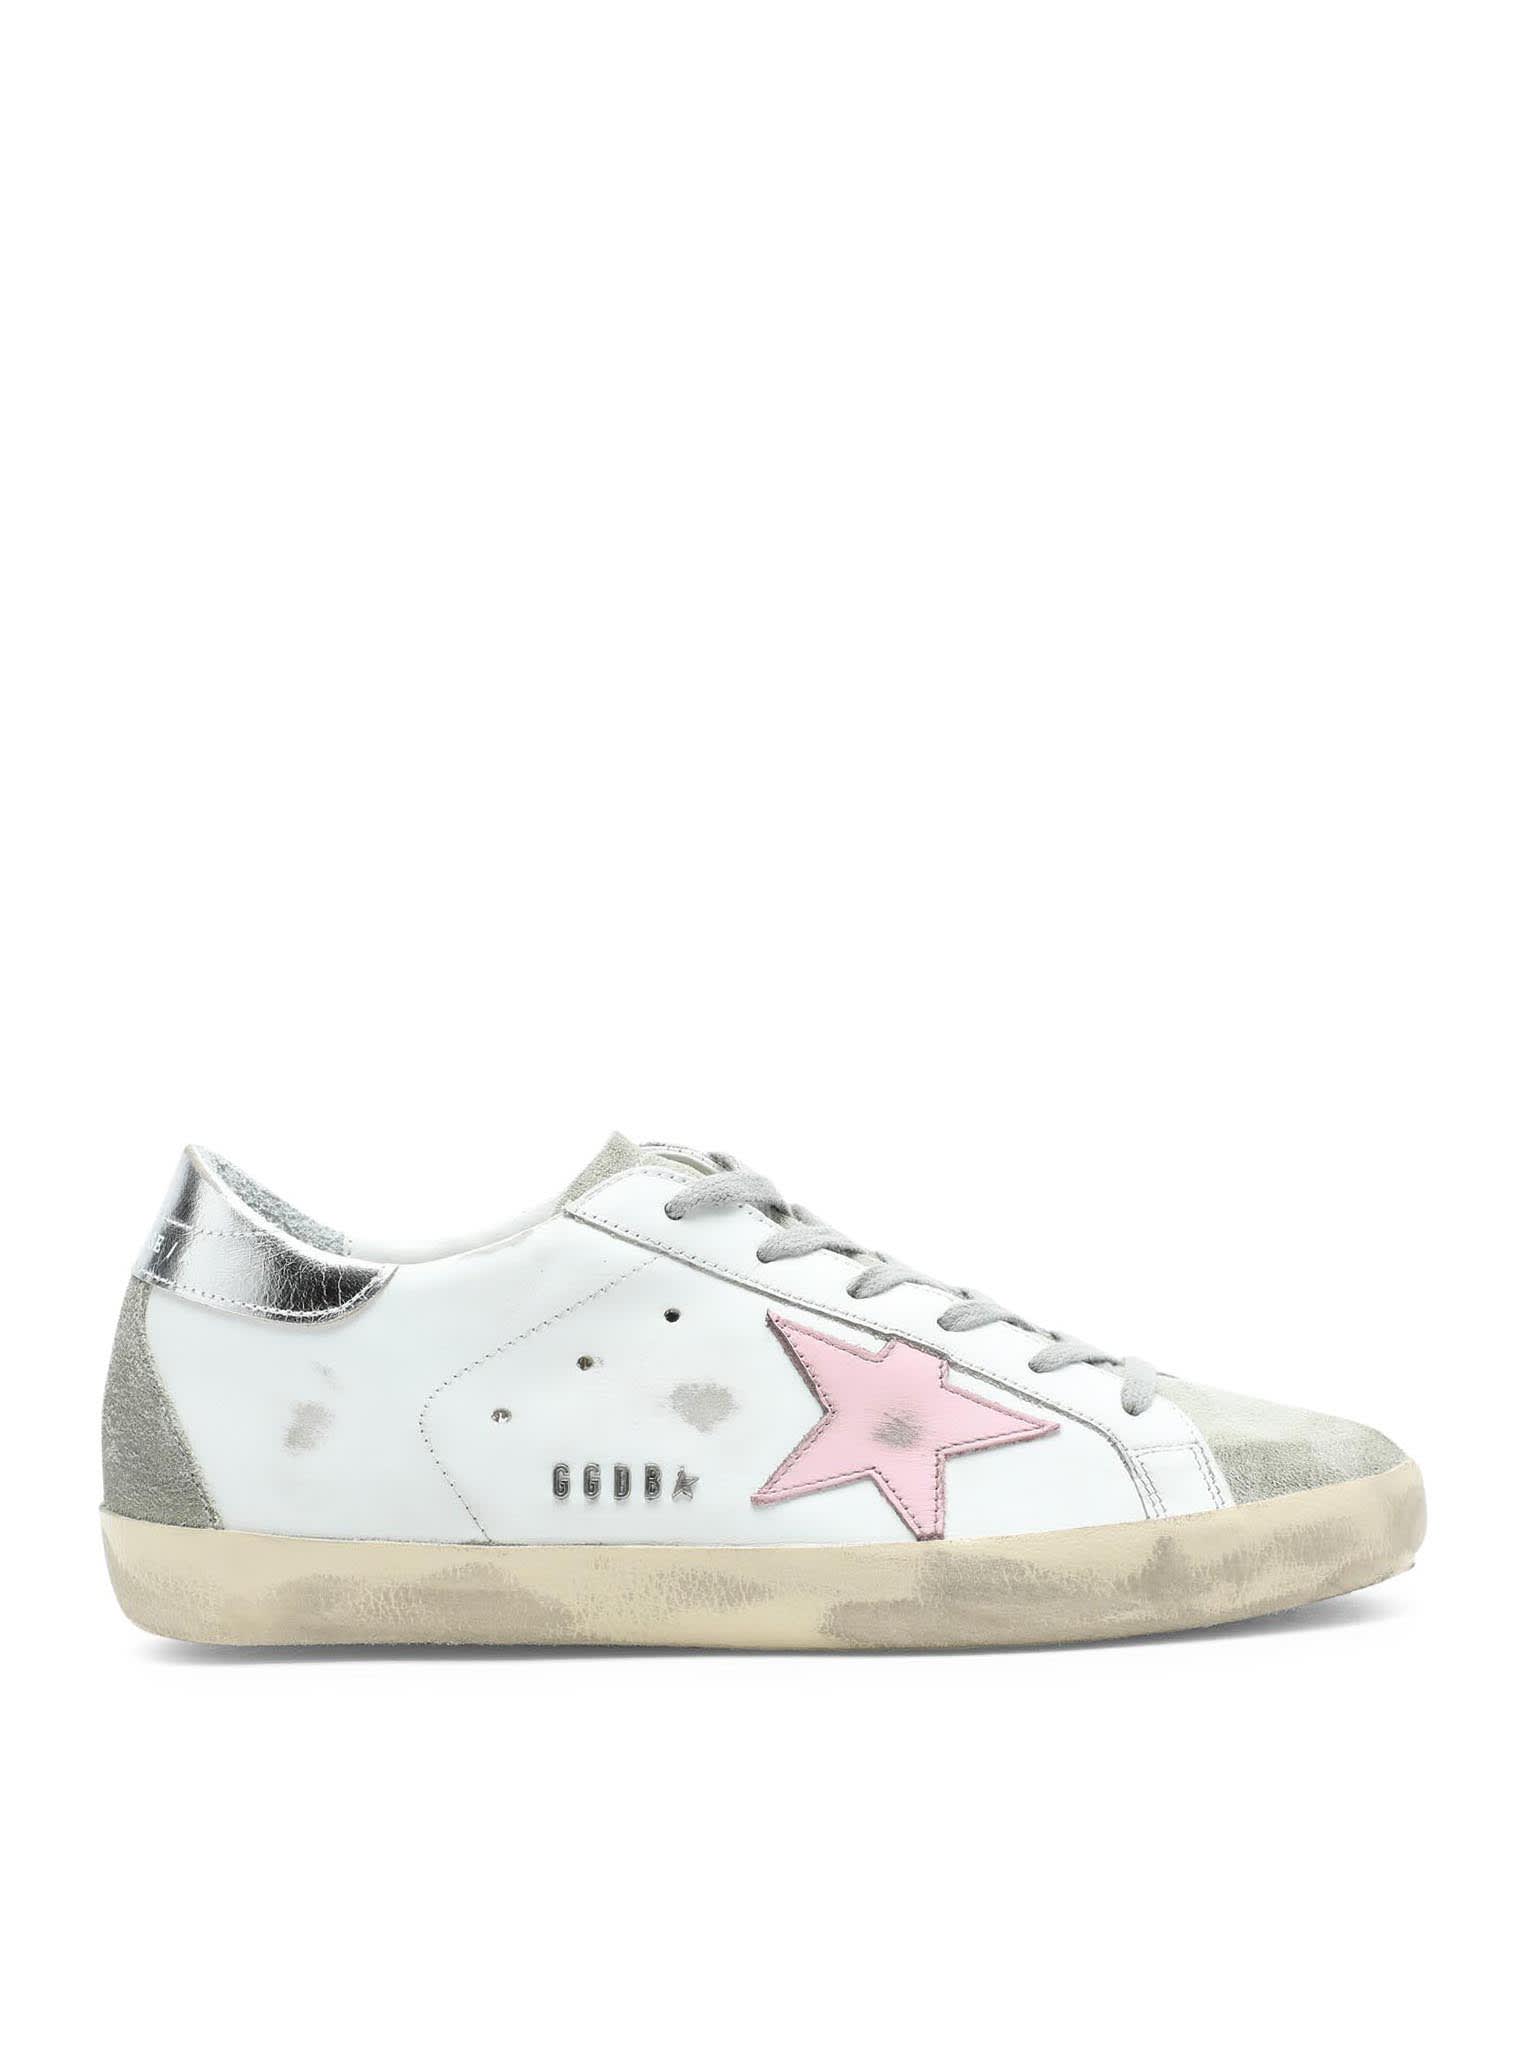 GOLDEN GOOSE SUPER-STAR LEATHER UPPER AND STAR SUEDE TOE